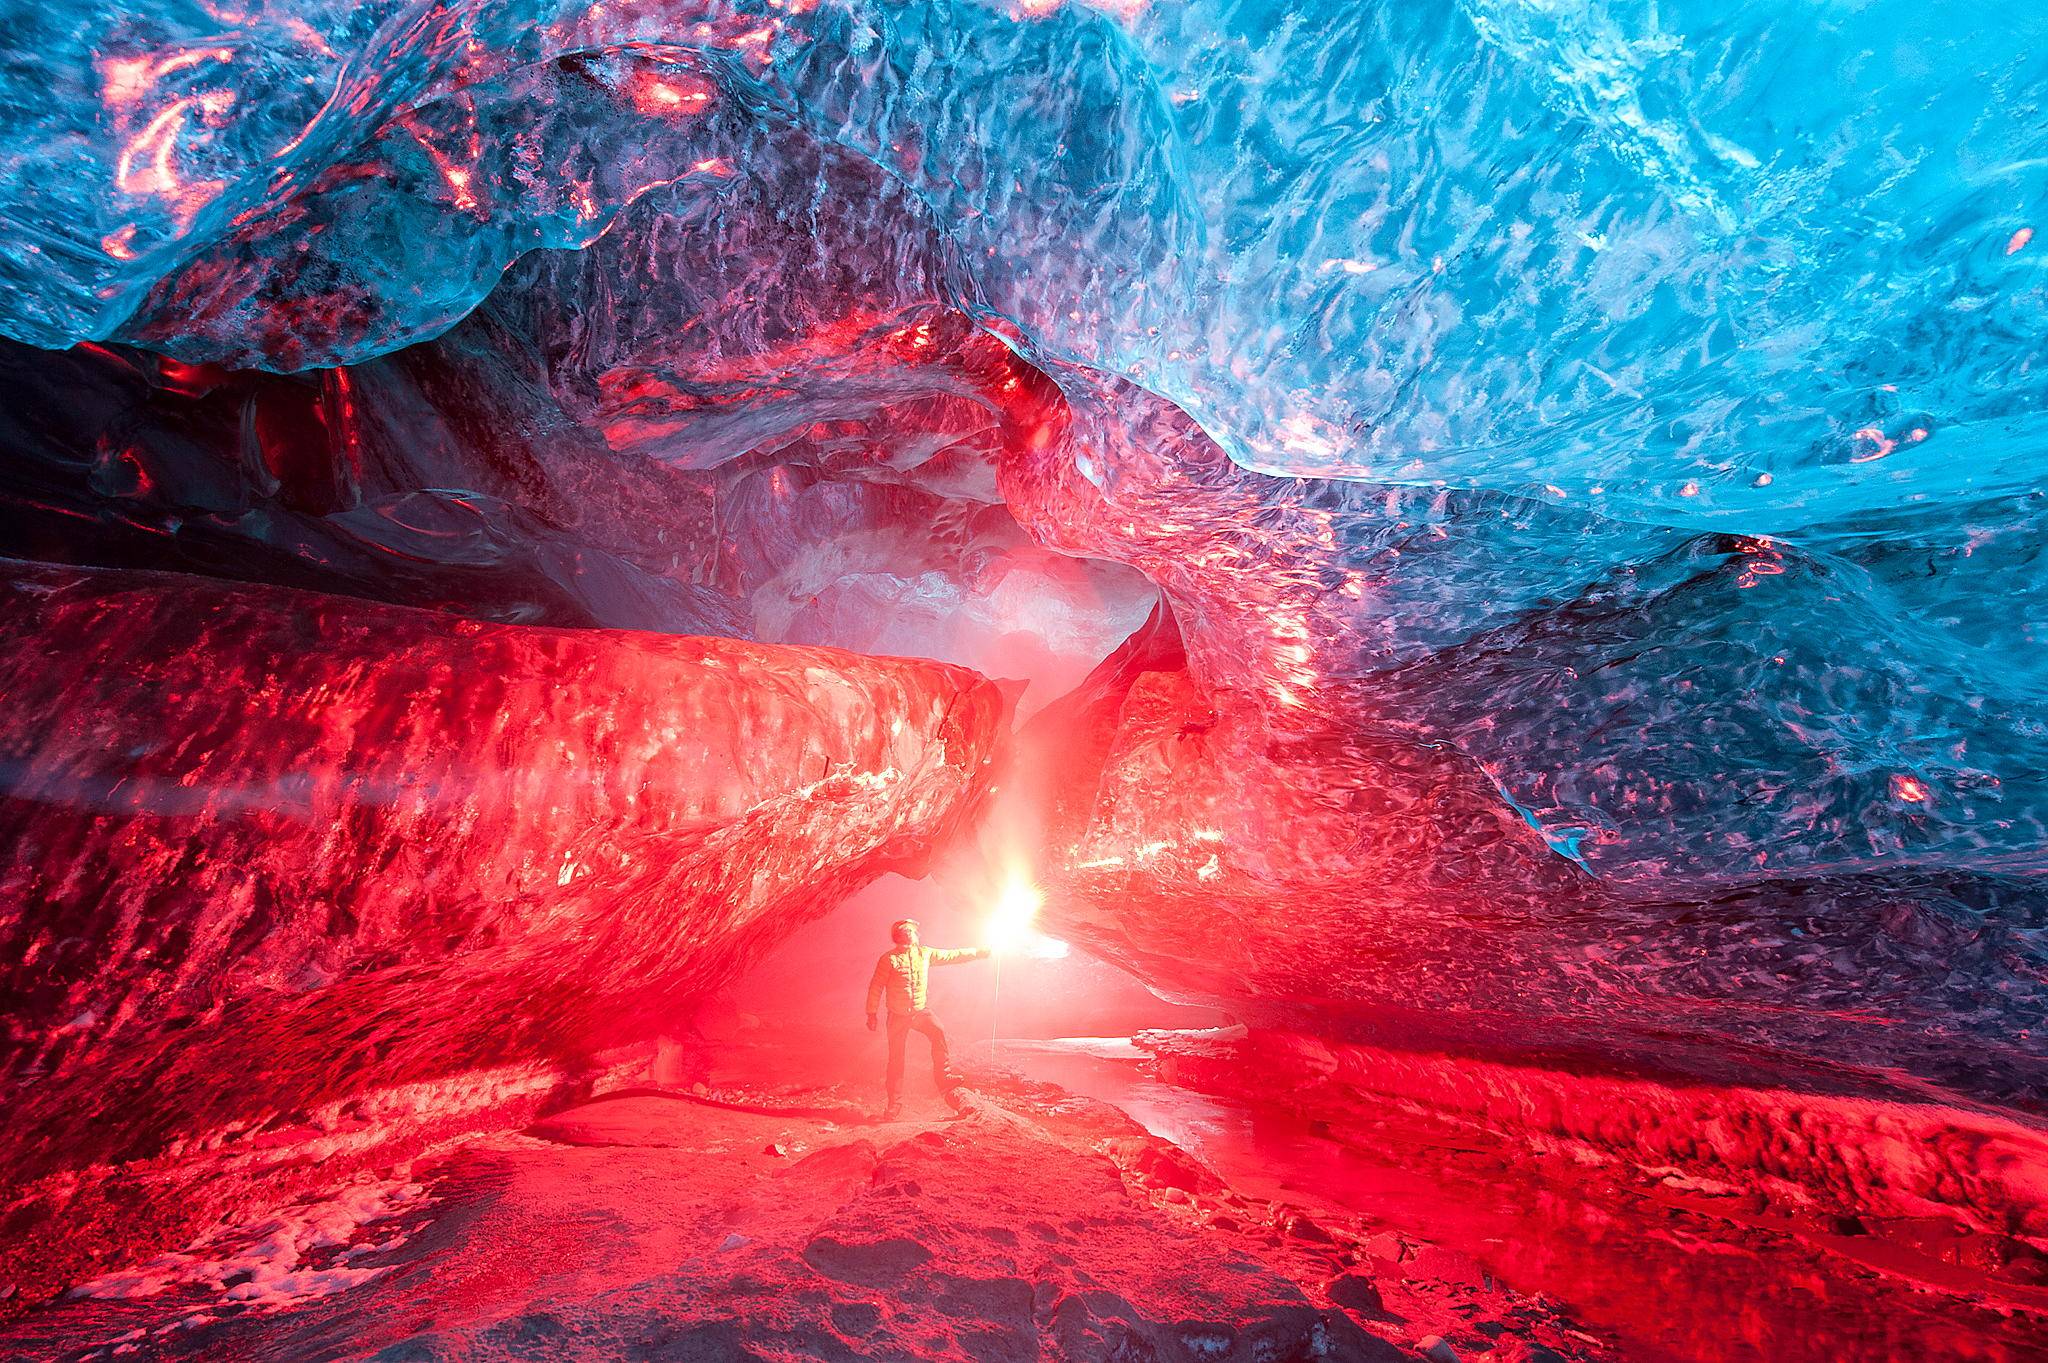 This ice cave somewhere in Iceland